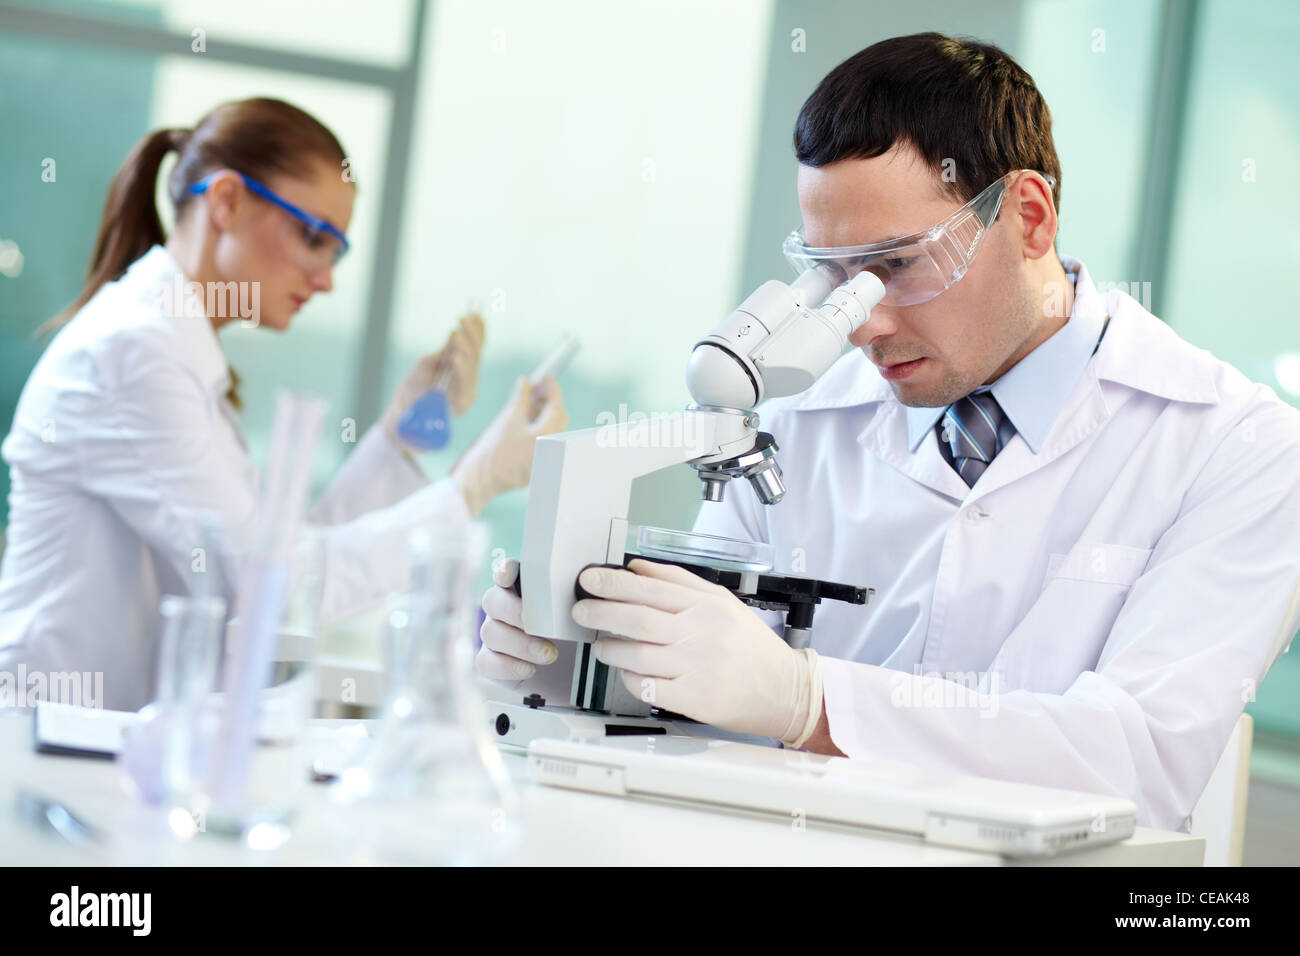 Two scientists conducting research in a lab environment Stock Photo